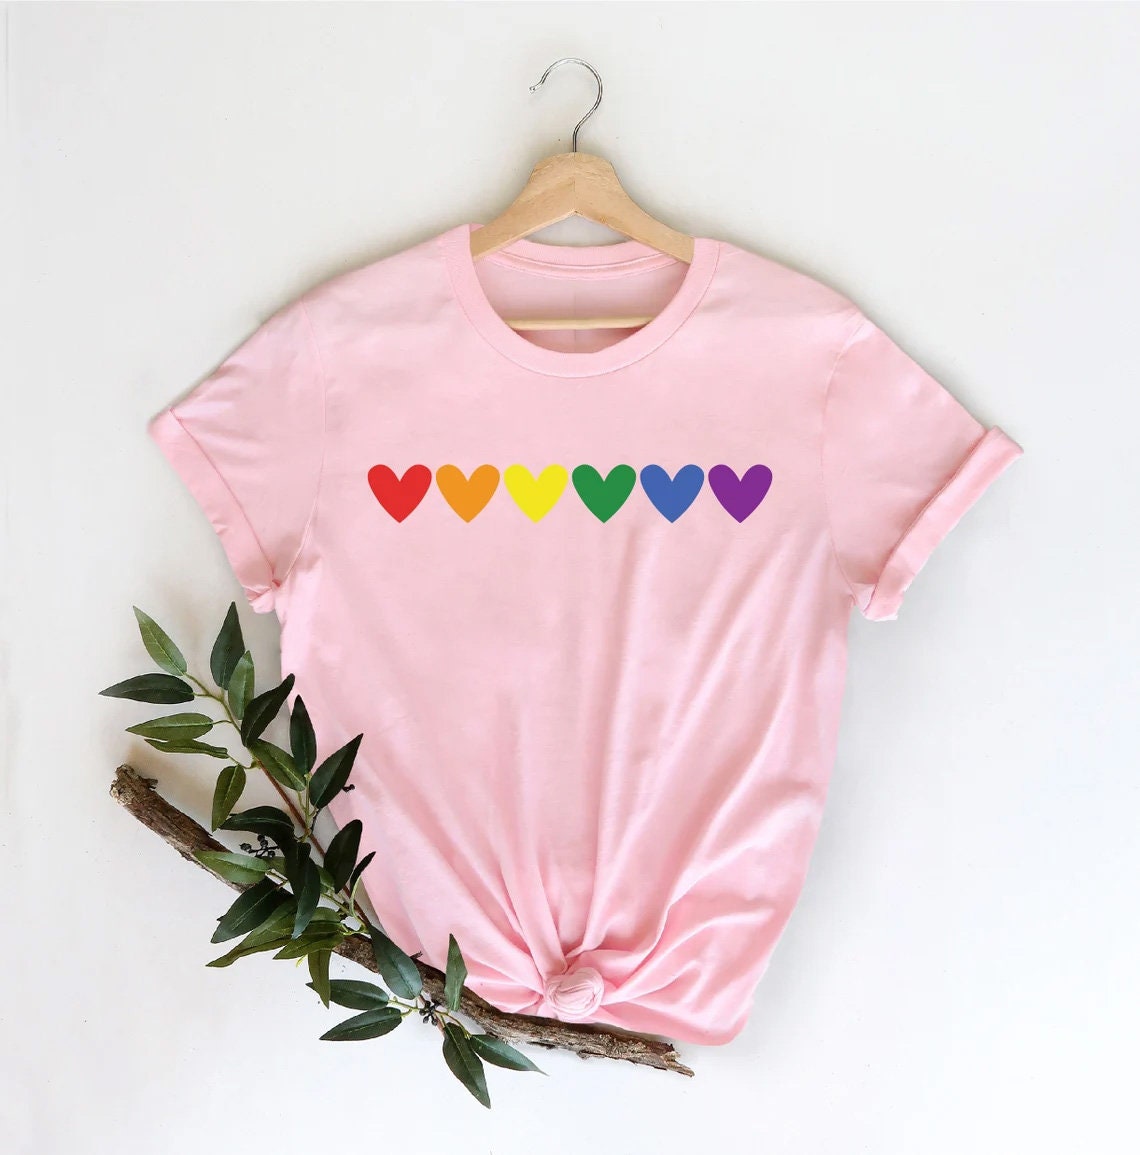 Discover Love is Love Shirt, LGBT Shirt, Pride Shirt, Lesbian Gay Shirt, Love is Love Shirt Men, Love is Love Shirt, Rainbow Shirt, Pride Tee